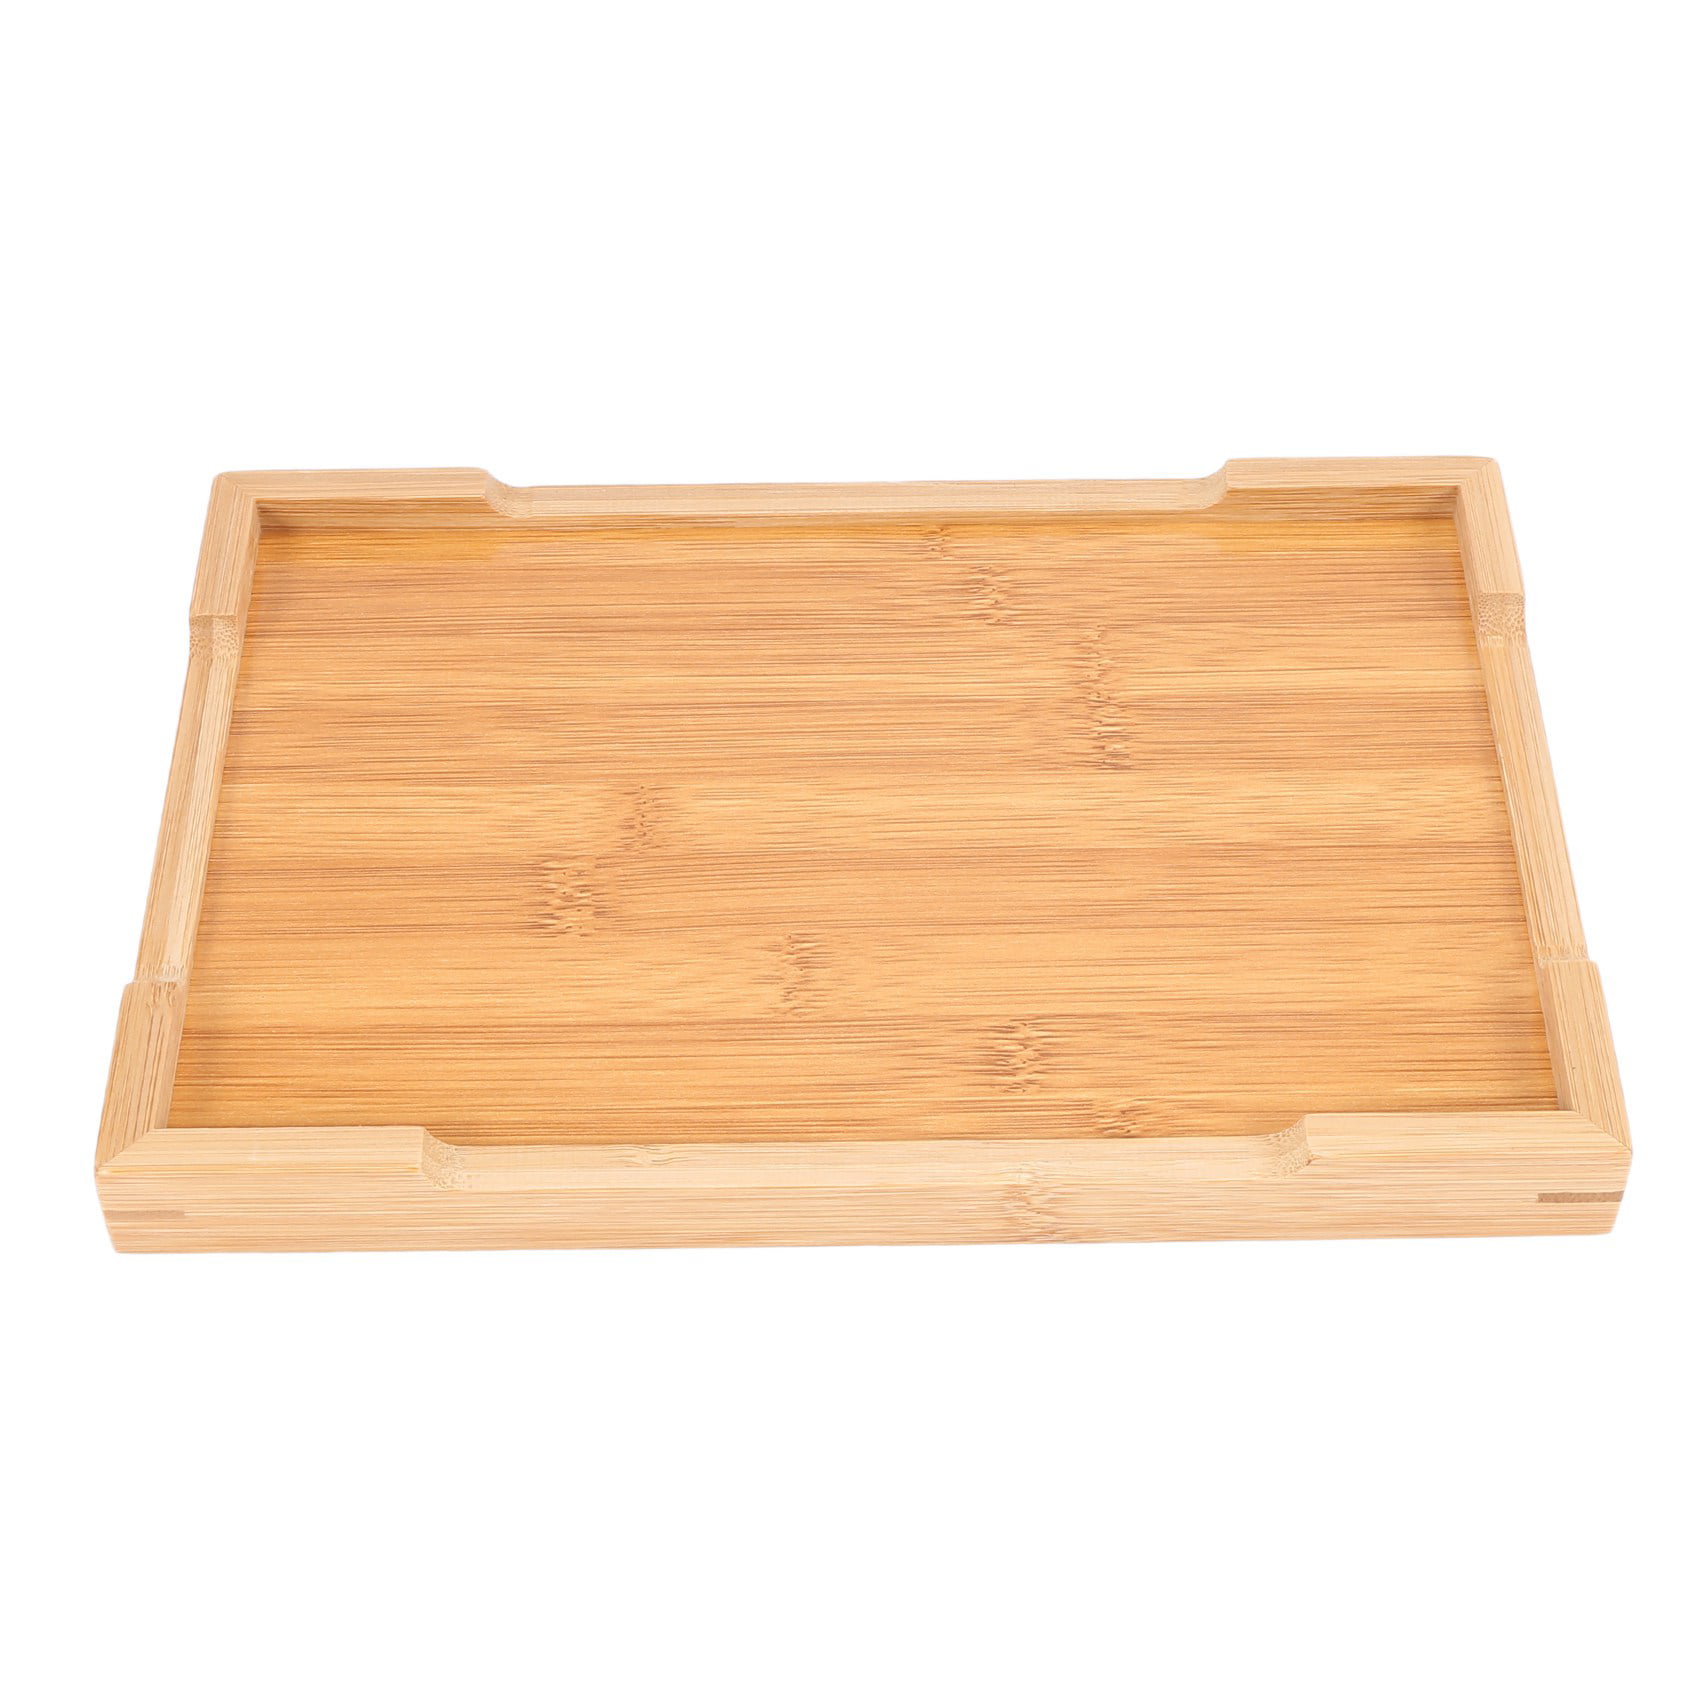 Wooden Serving Tray Kung Fu Tea Cutlery Trays Storage Pallet Fruit Plate 